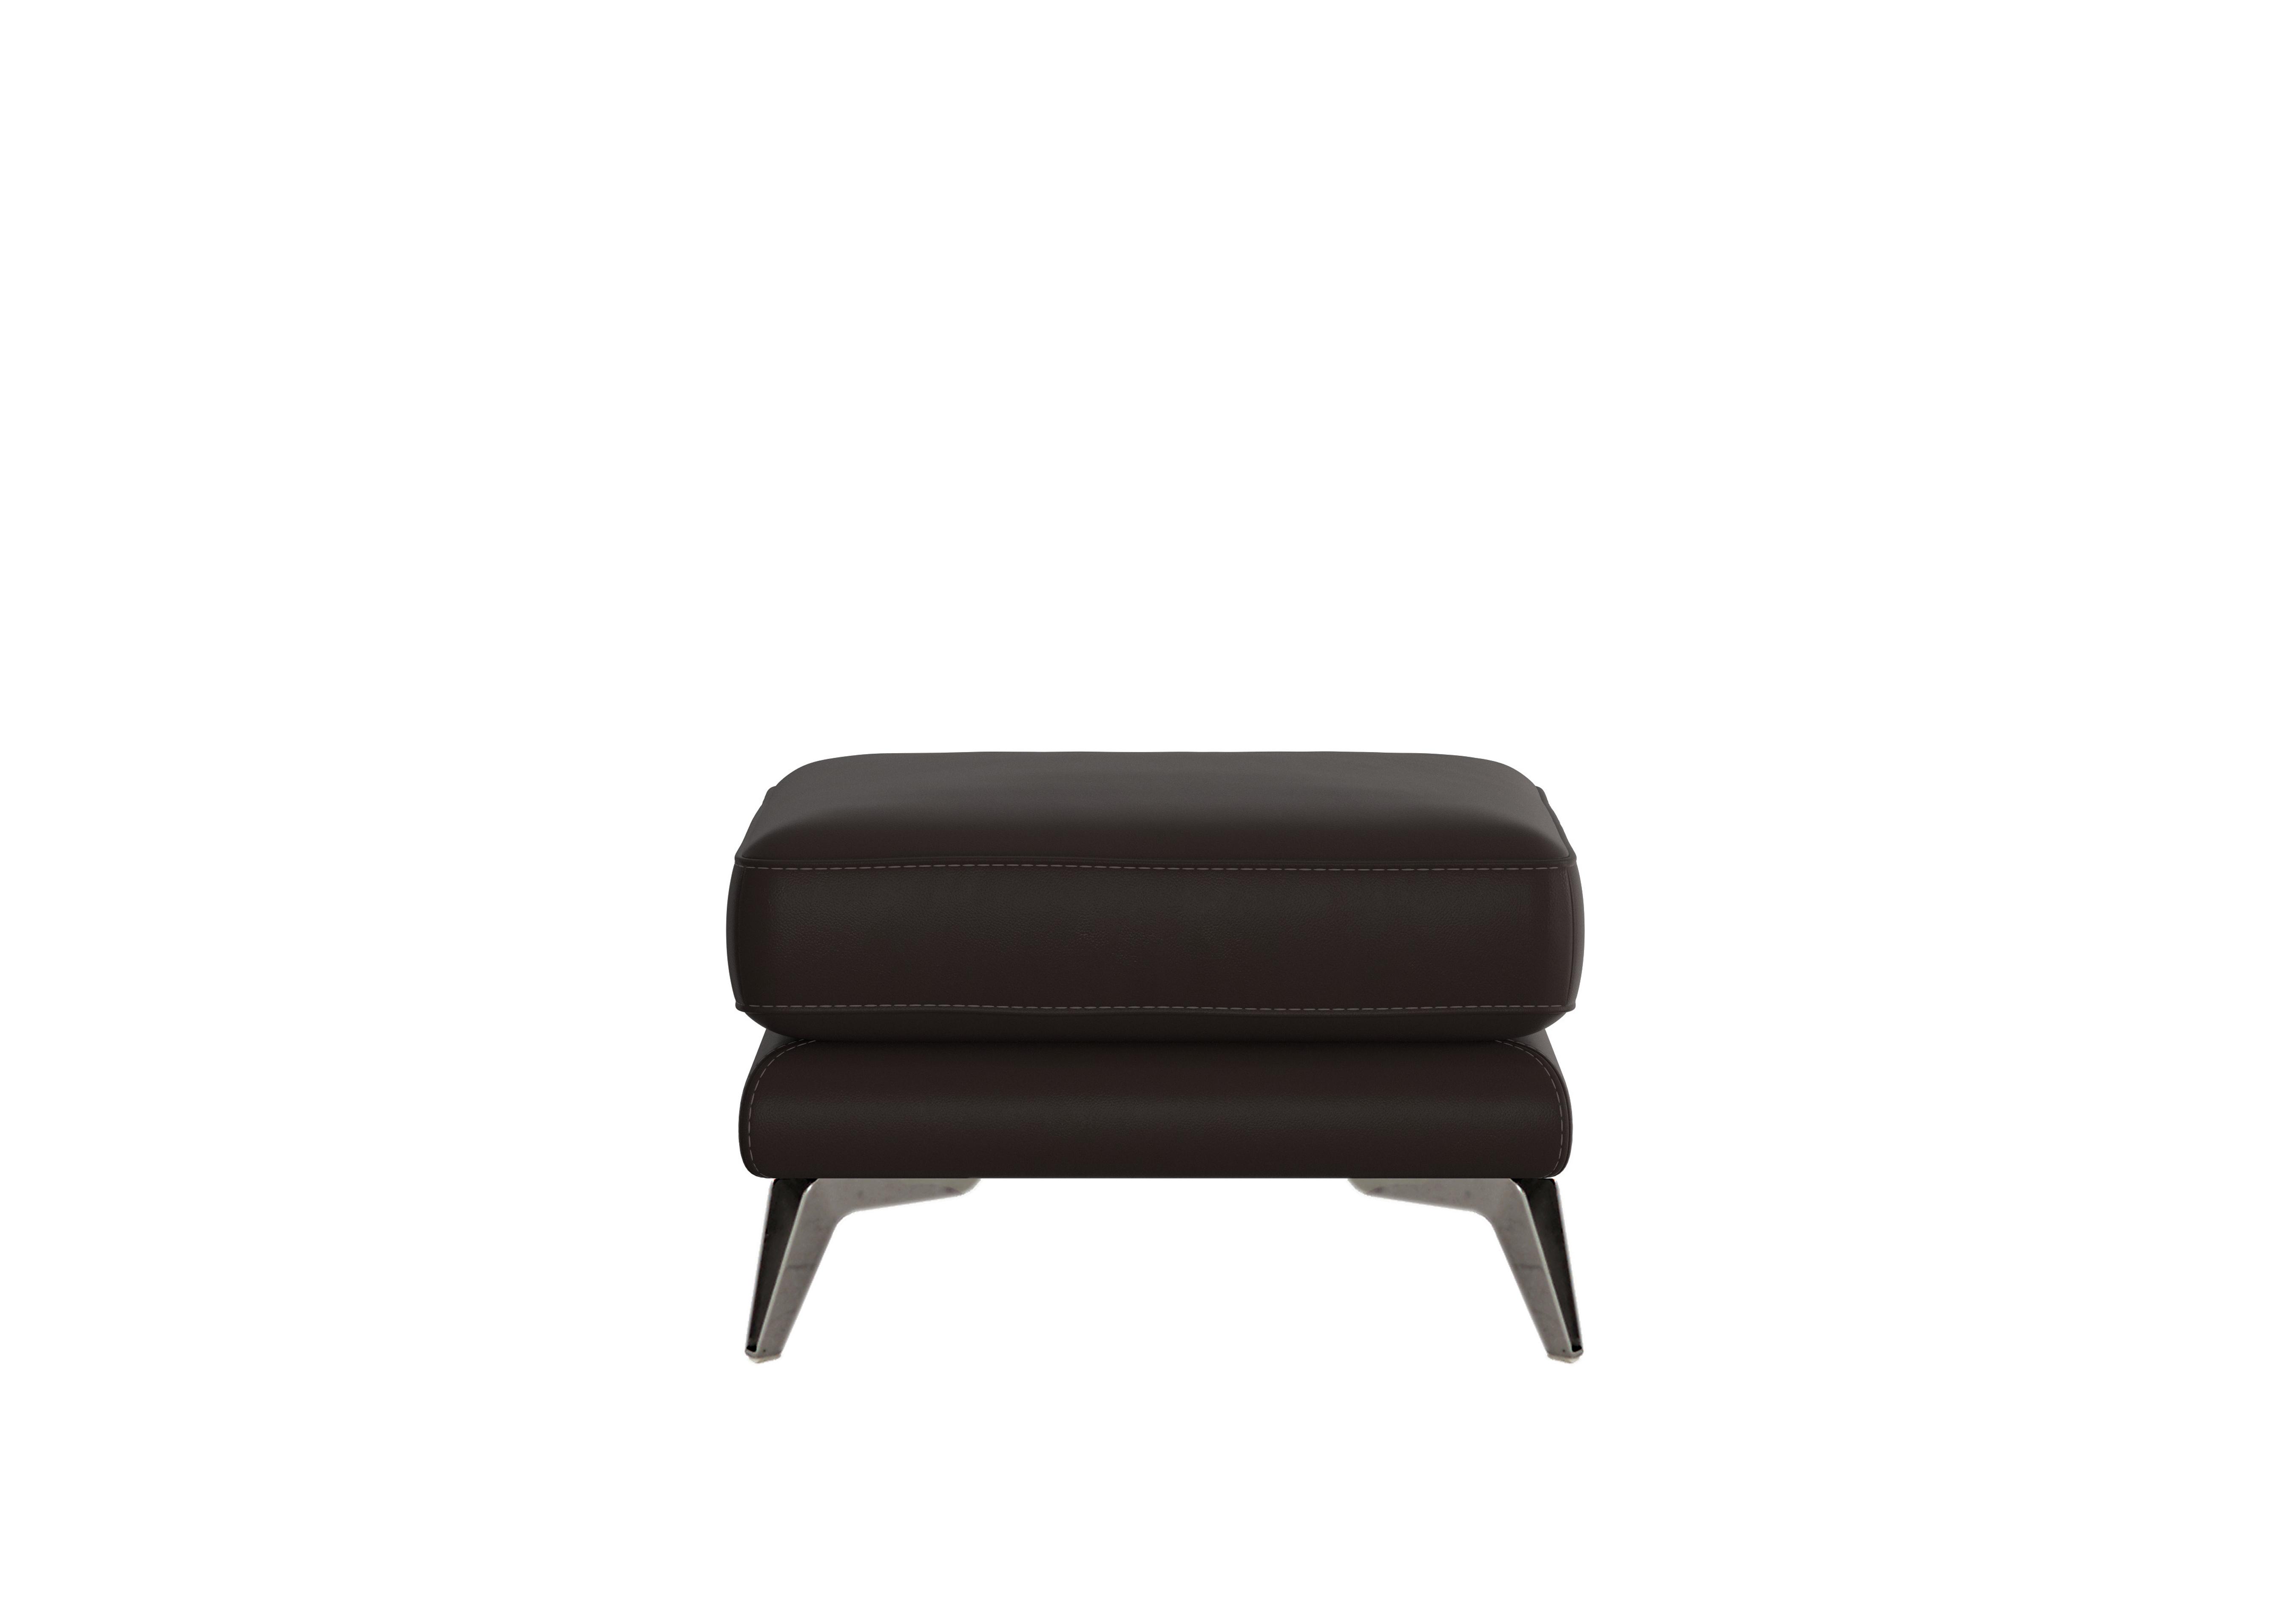 Contempo Leather Footstool in Bv-1748 Dark Chocolate on Furniture Village